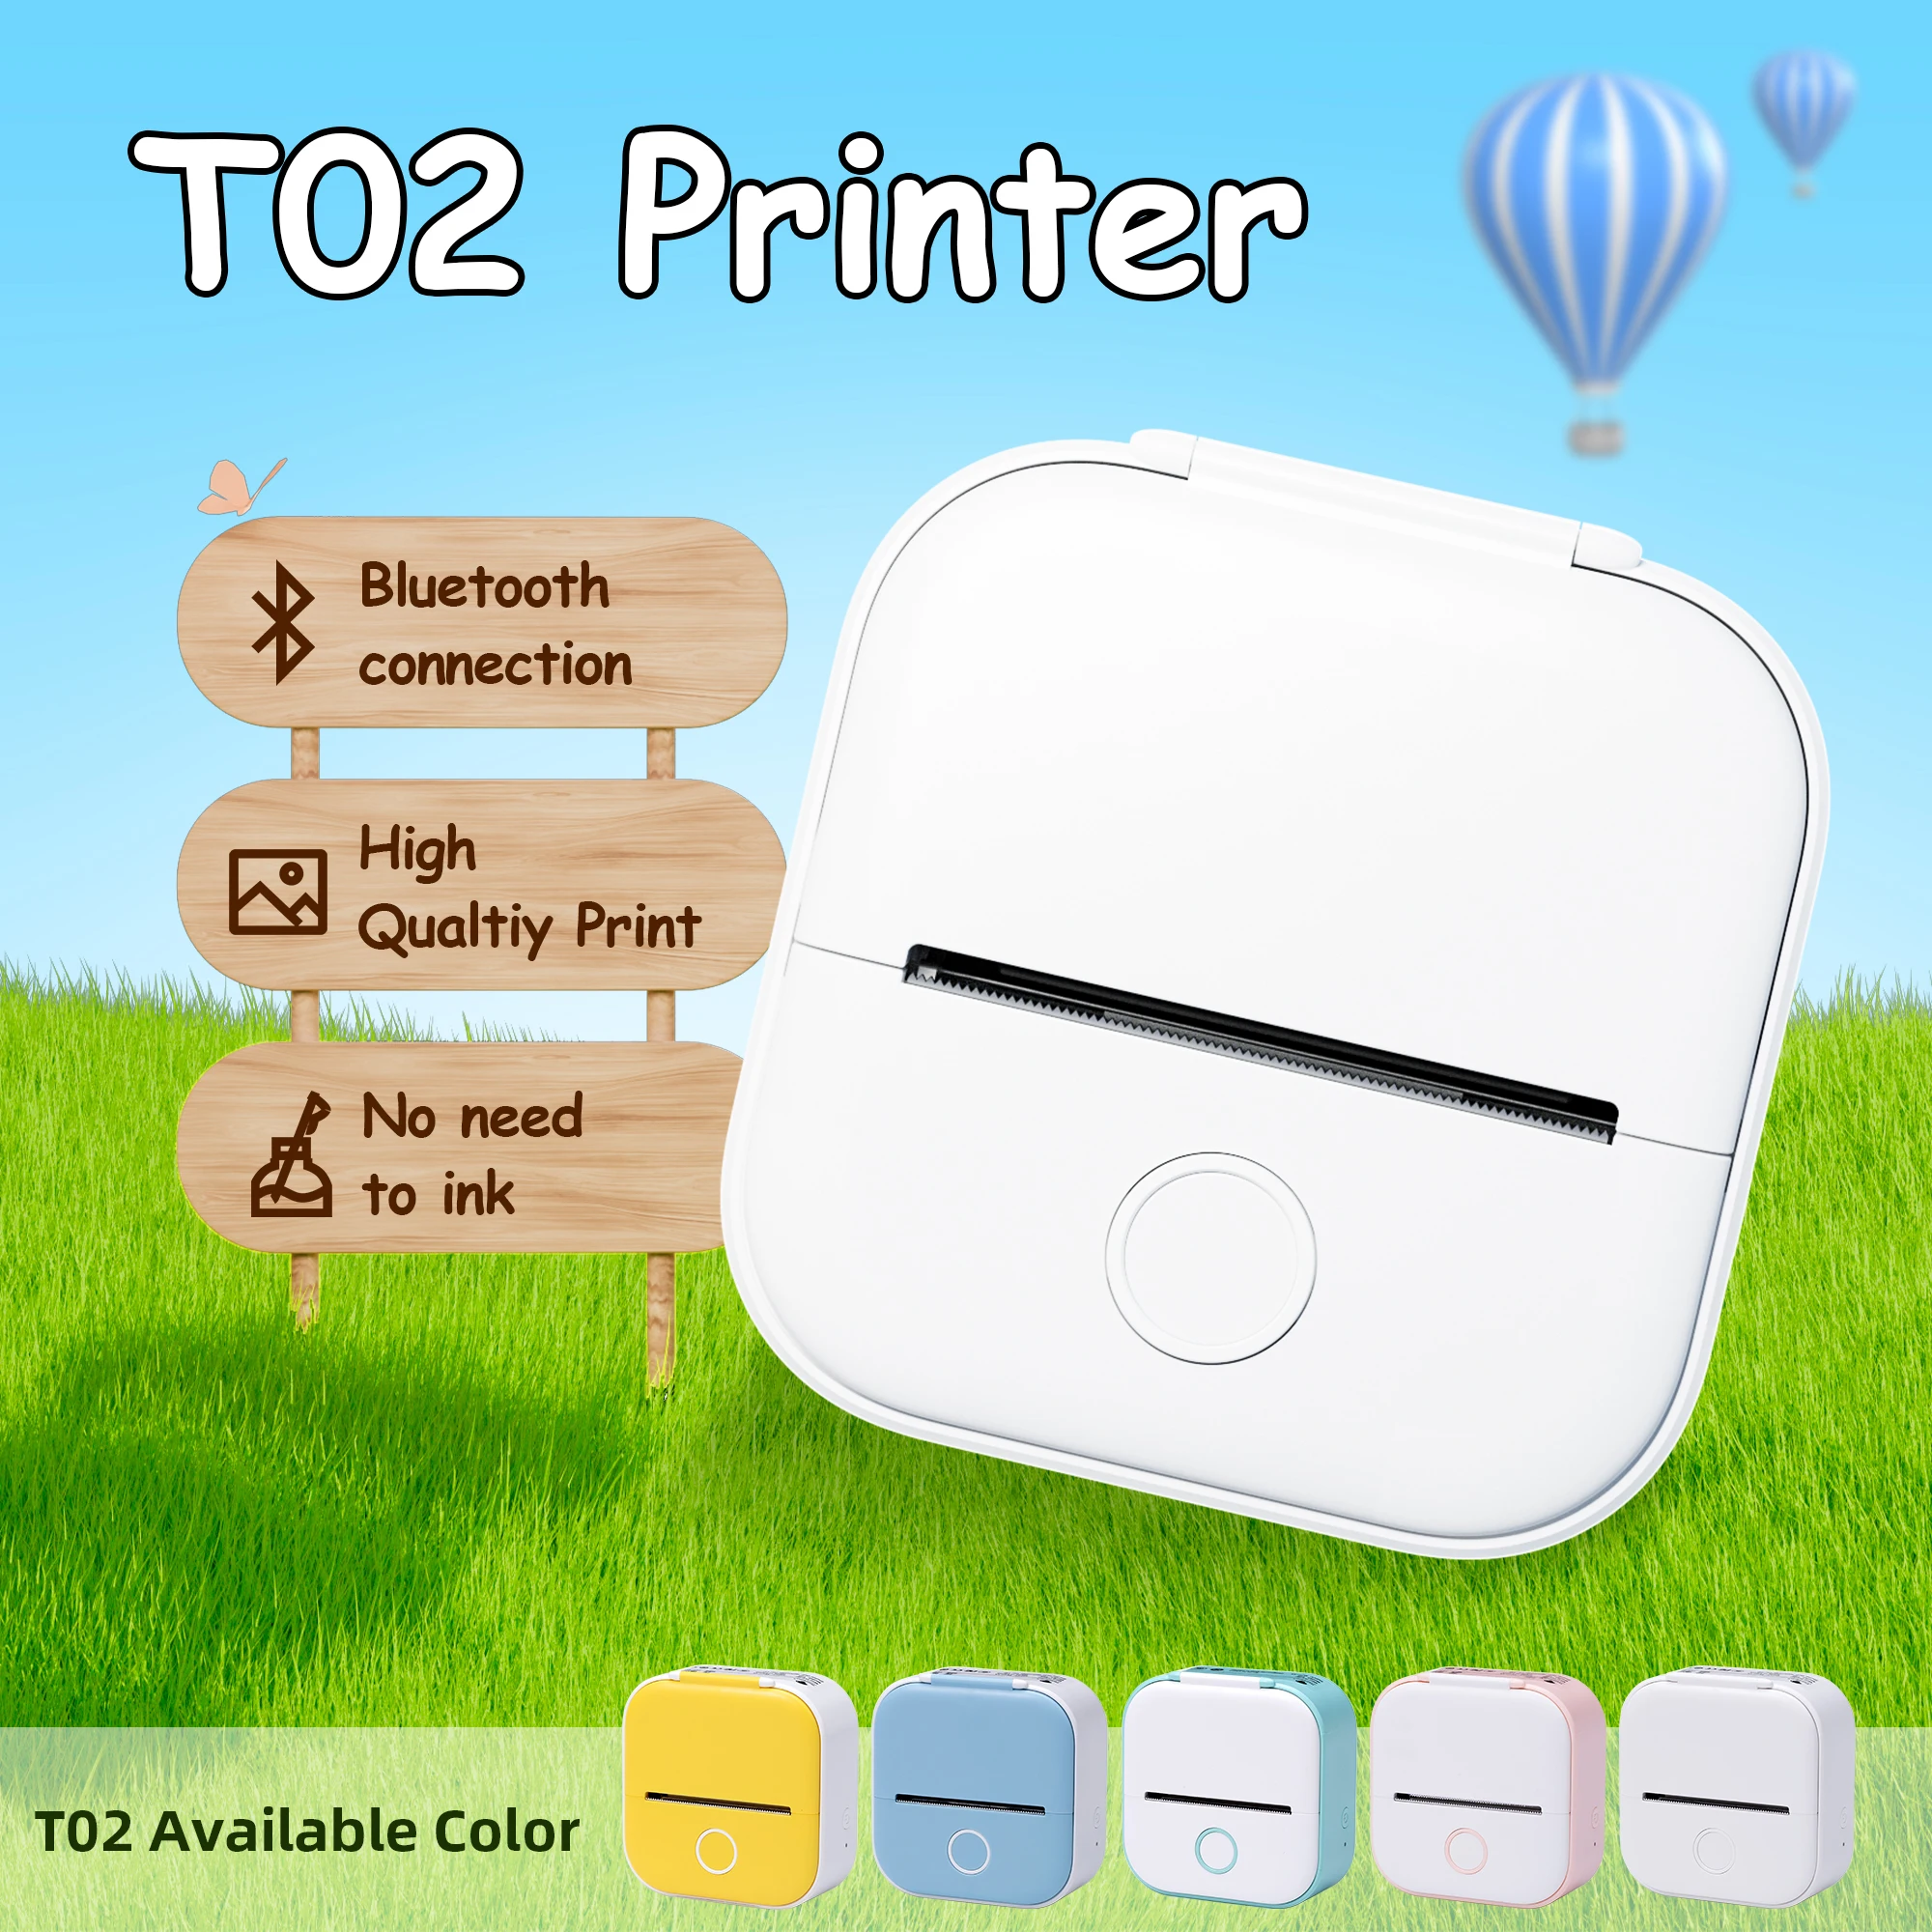 

Phomemo T02 Wireless Pocket Thermal Printer Portable Mini Wirelessly BT Connect 203dpi Photo Label Memo List Printing Clearly